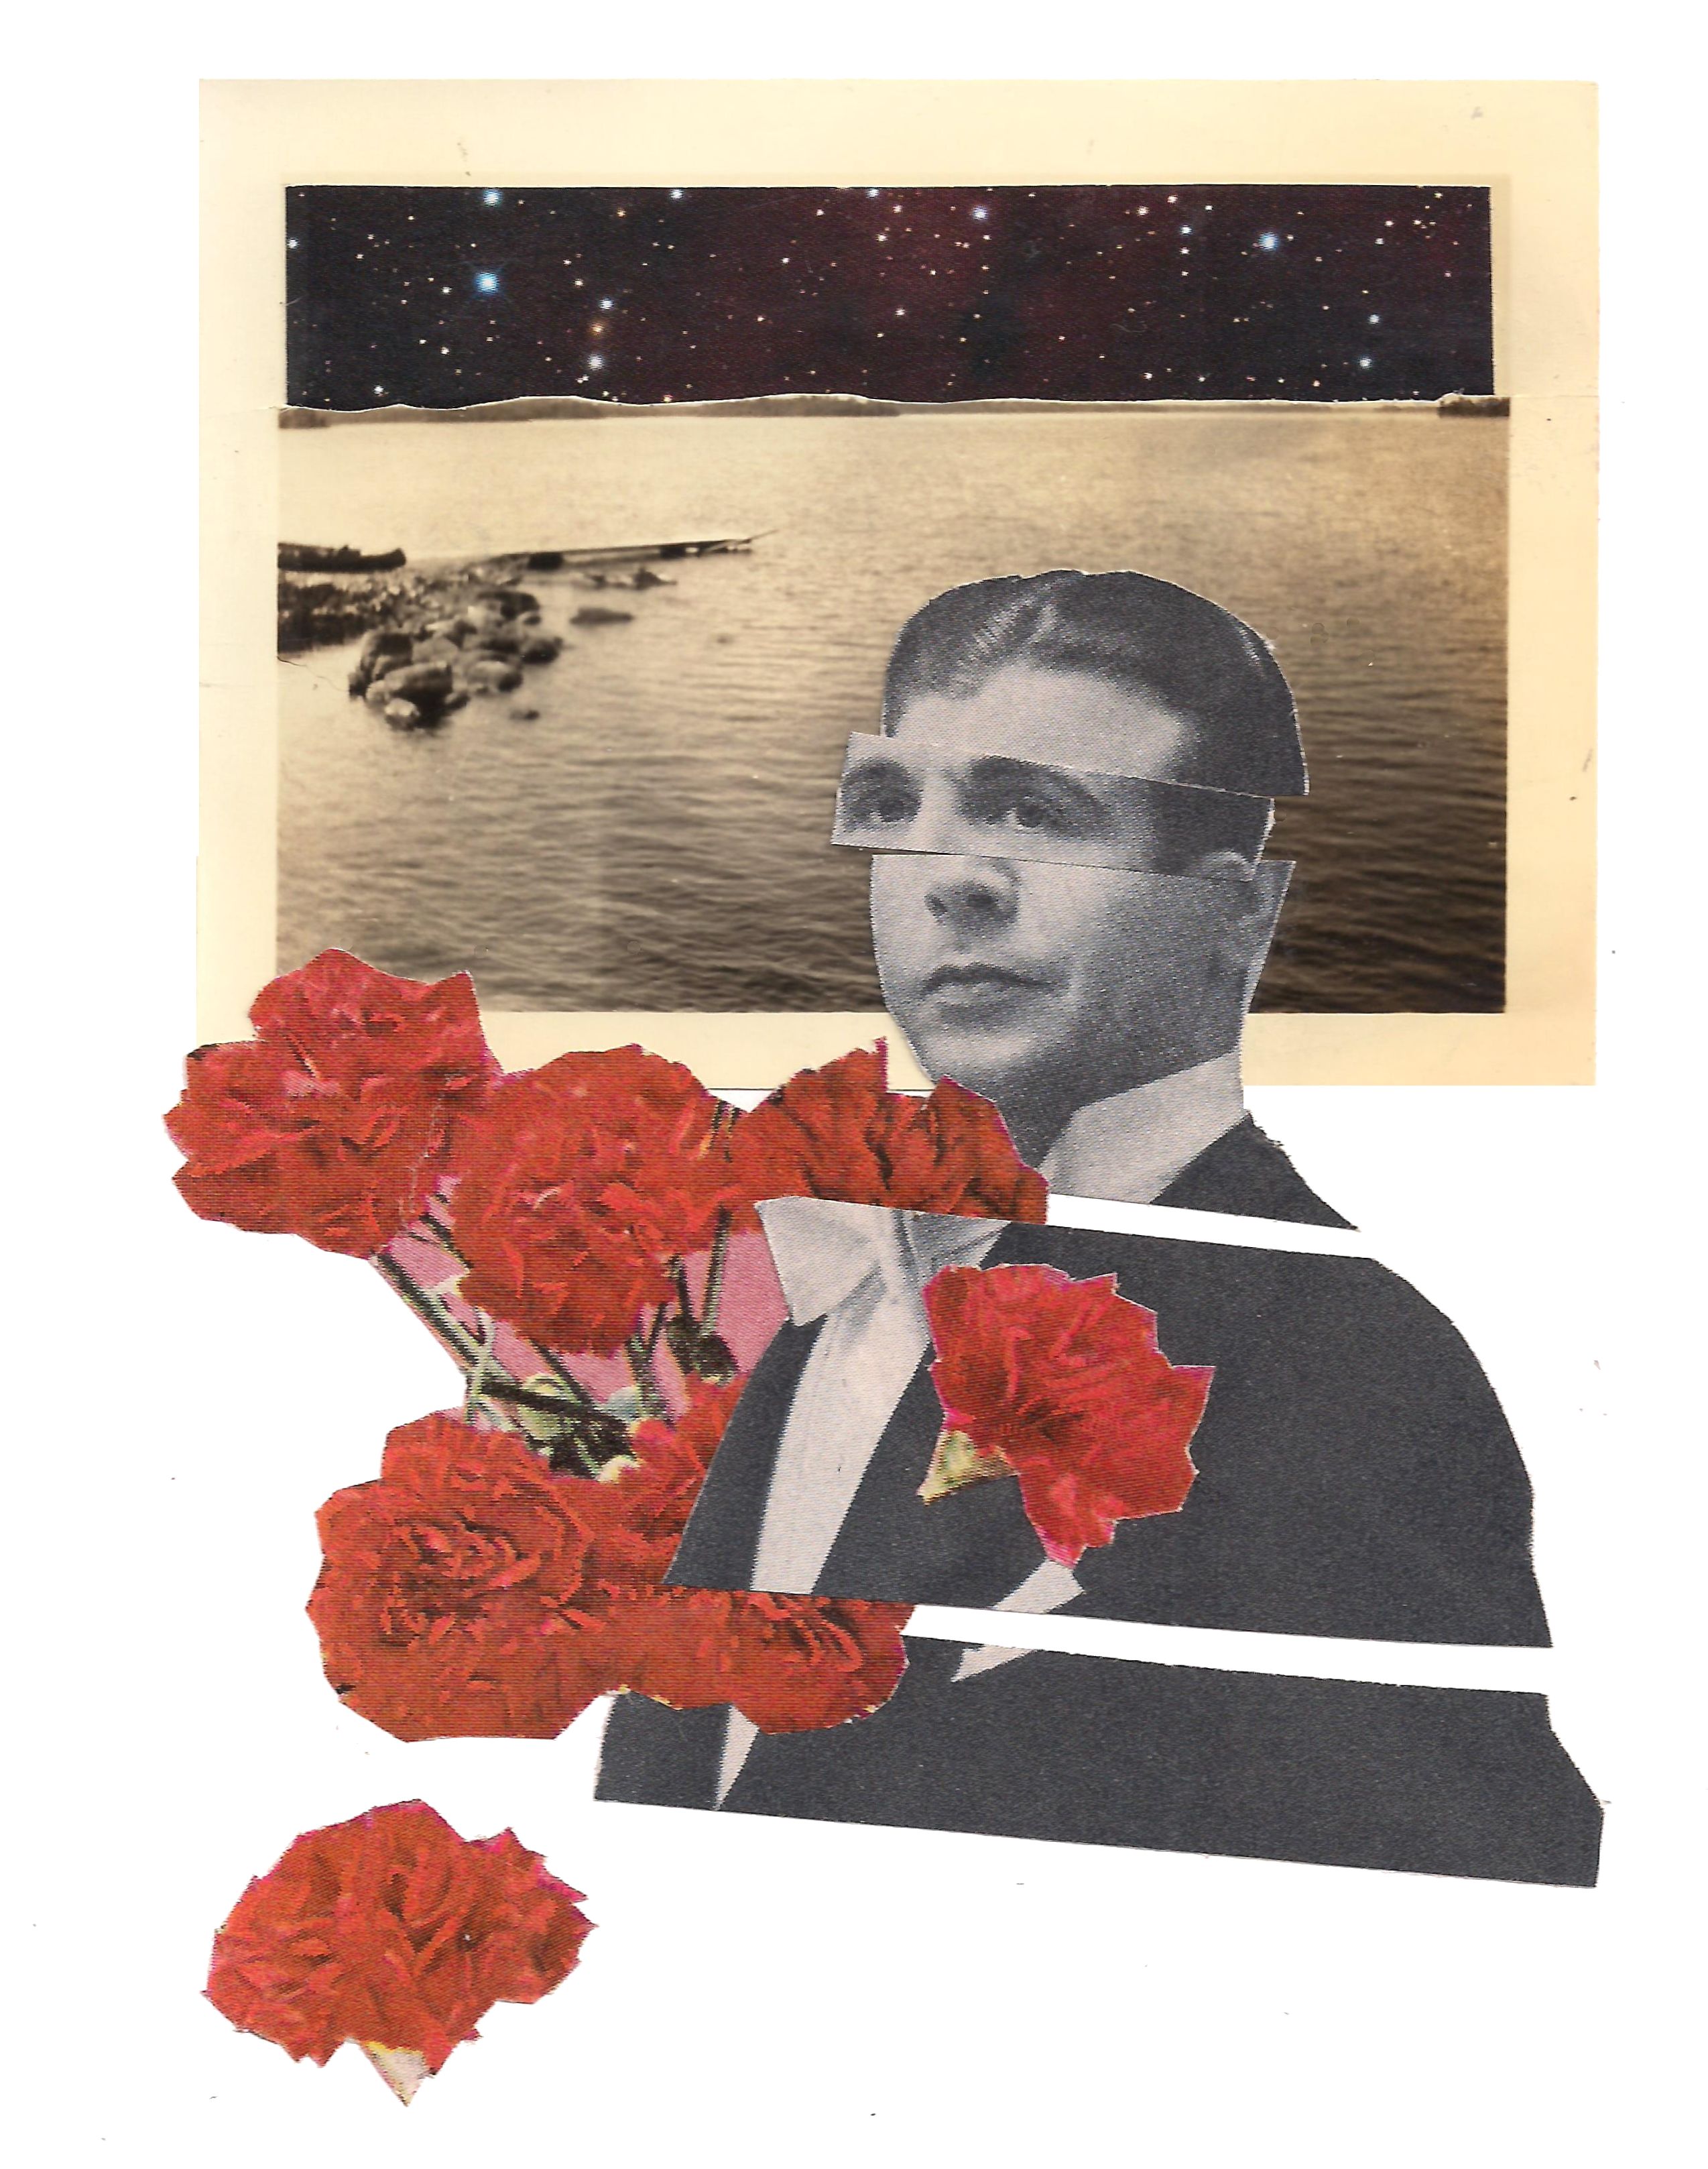 analog collage using vintage images cut from magazines and a vintage black and white photo of a lake. The man in the photo is surrounded by red carnations.